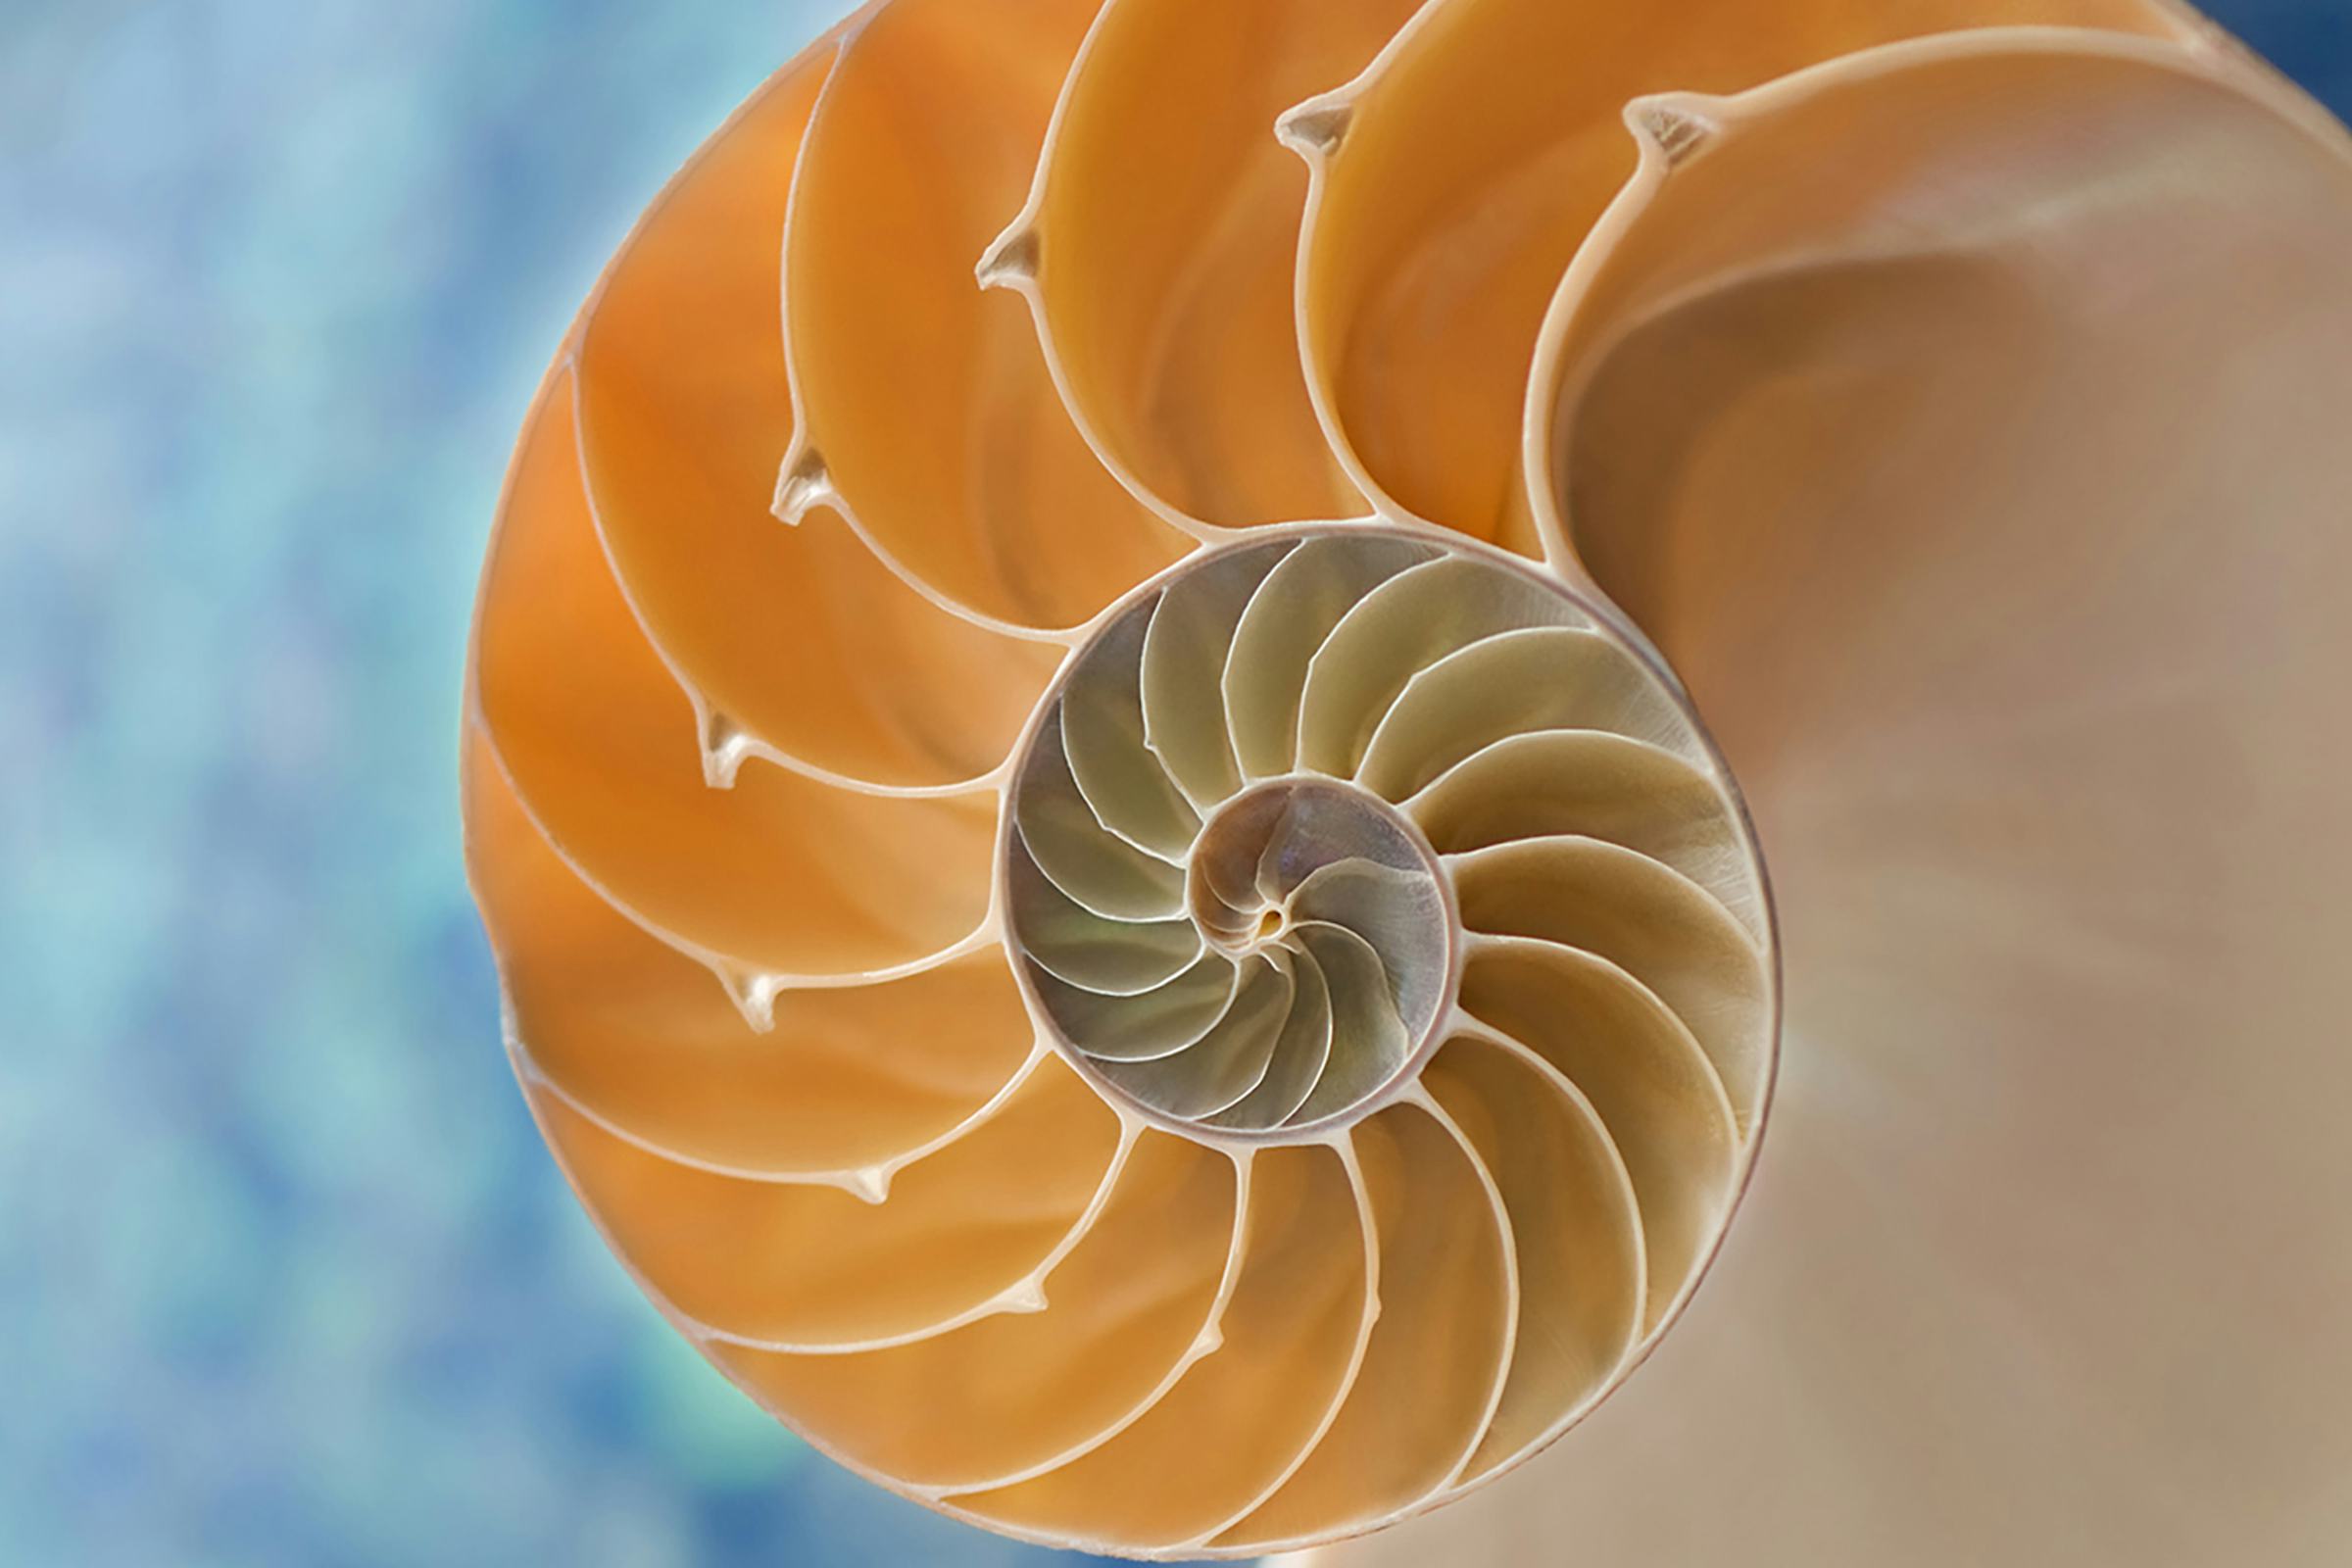 A cross-section of a nautilus shell